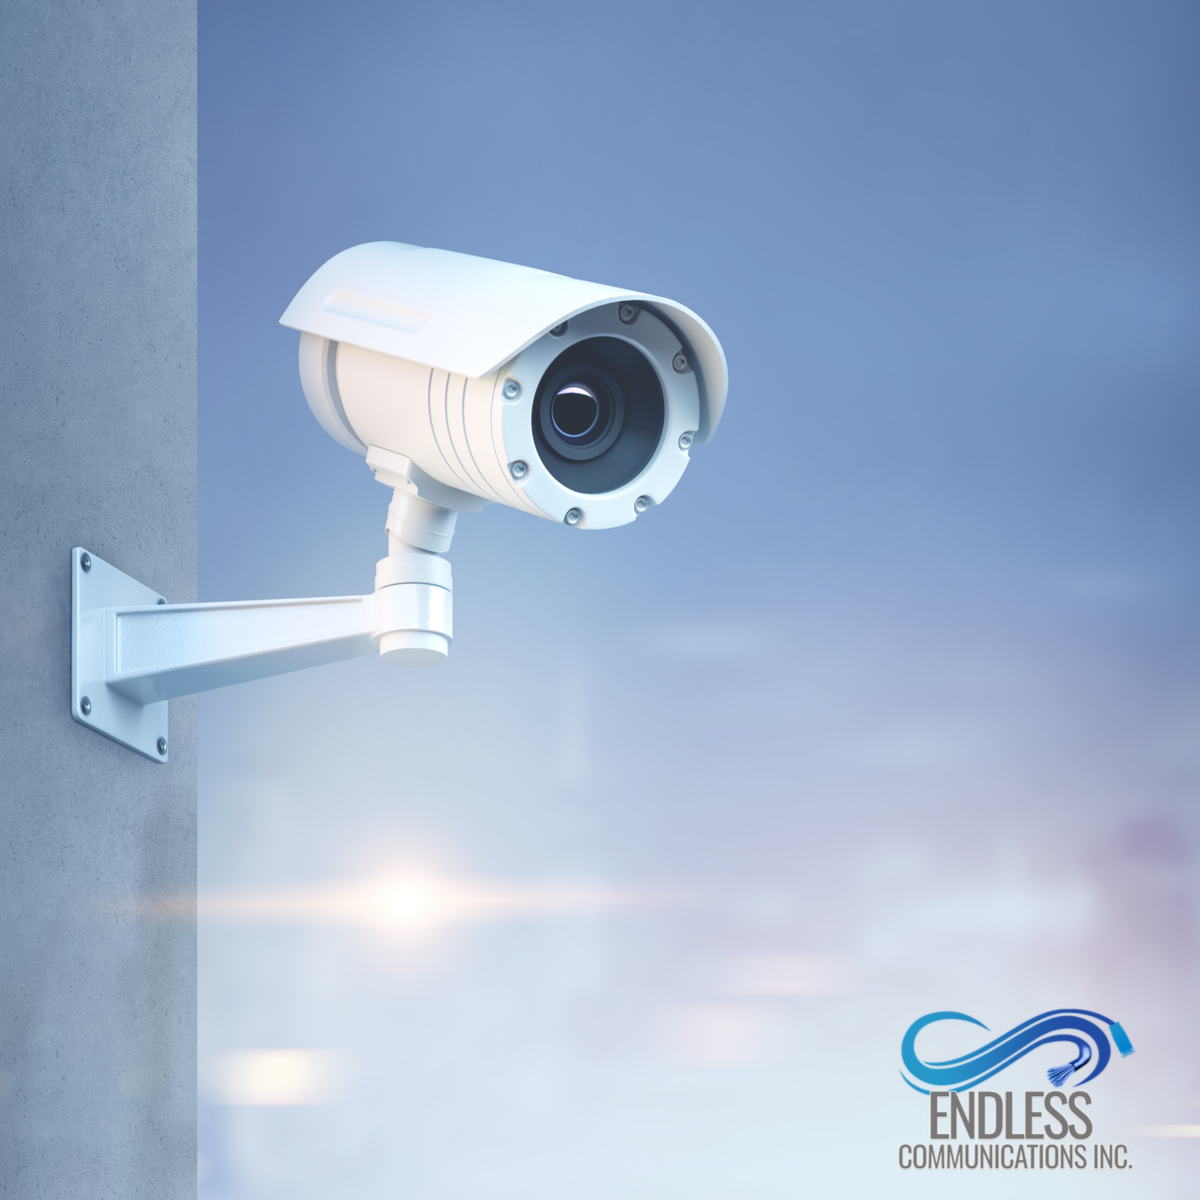 Are You Considering Security Camera Installation In Norco?